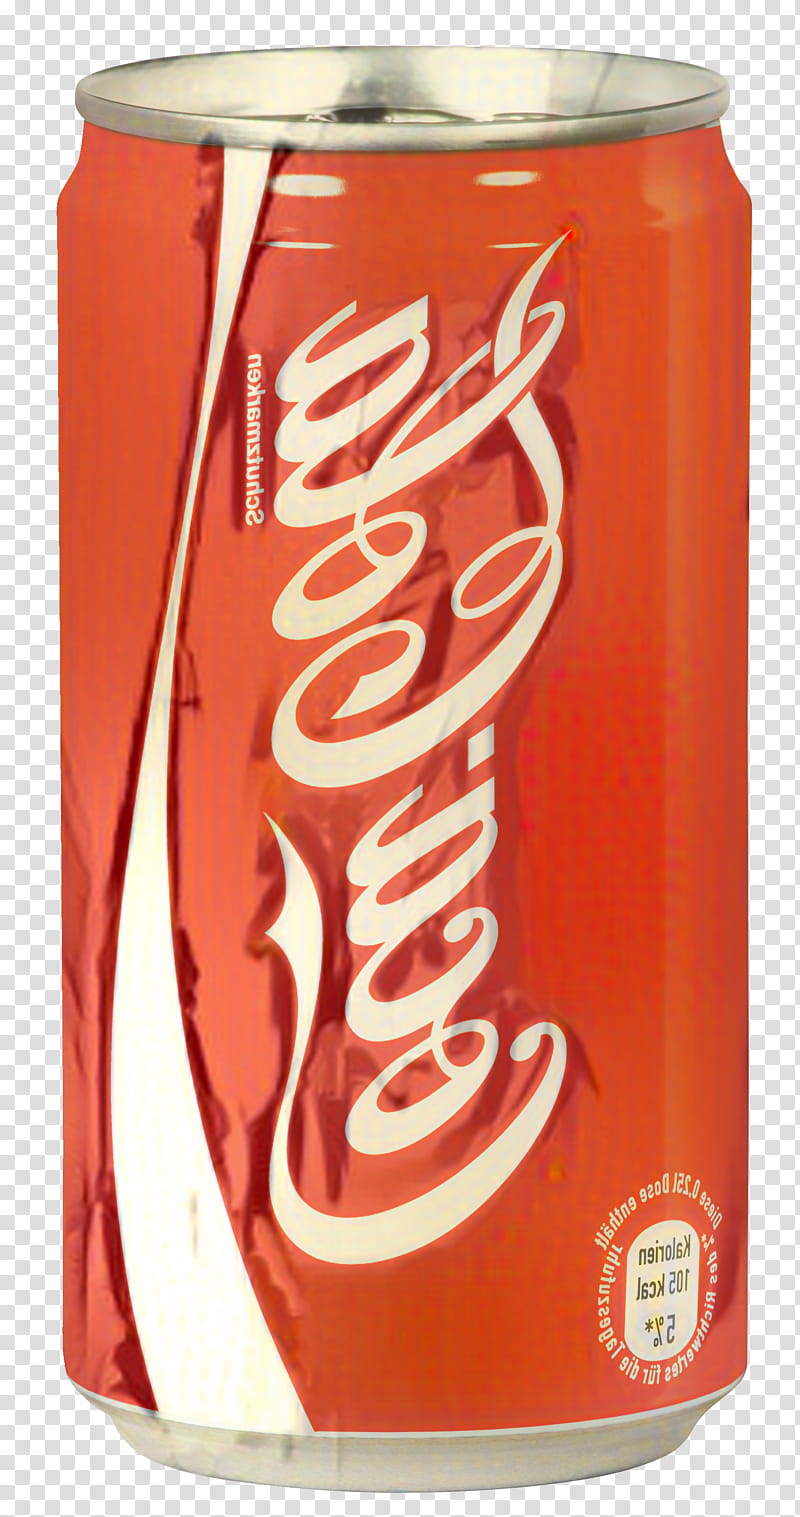 Coca Cola, Cocacola, Wright Company, Bicycle, Wright Flyer Iii, Fizzy Drinks, Drink Can, Aluminum Can transparent background PNG clipart